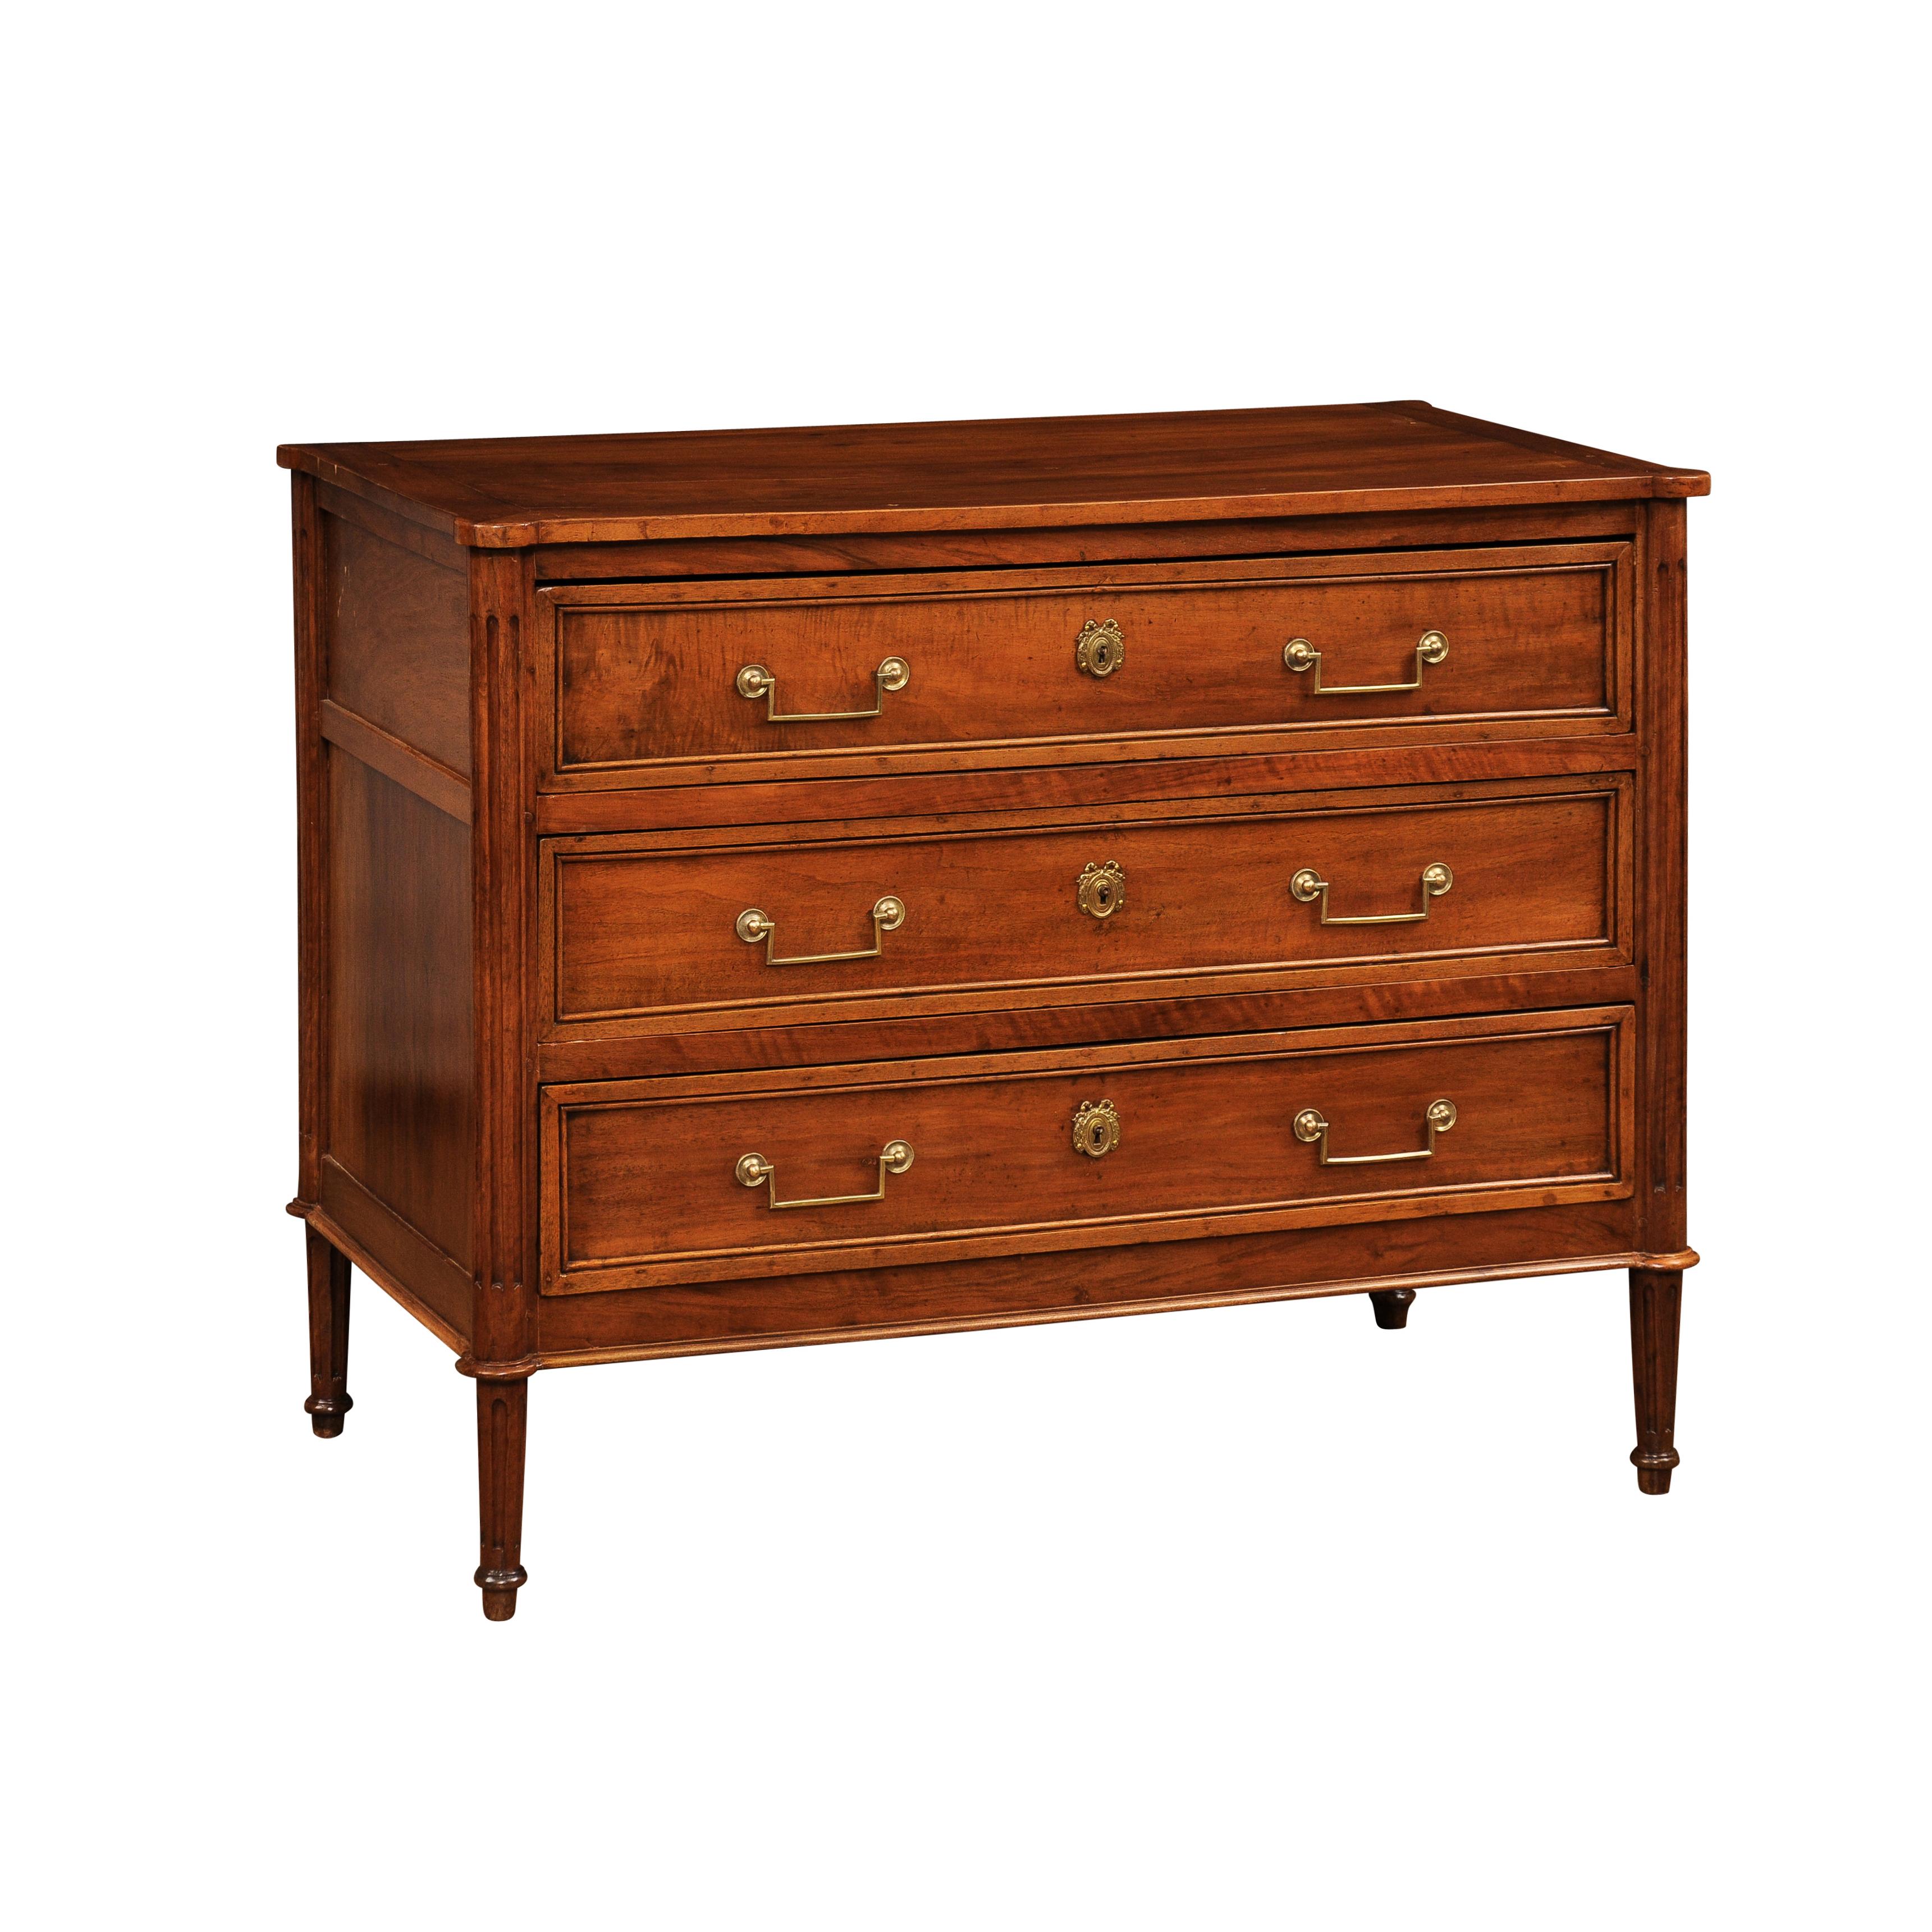 A French Louis XVI period walnut commode circa 1790 with three drawers, linear brass hardware, cylindrical tapered legs and rounded fluted side posts. Step into the elegance of the French Louis XVI period with this exquisite walnut commode from the